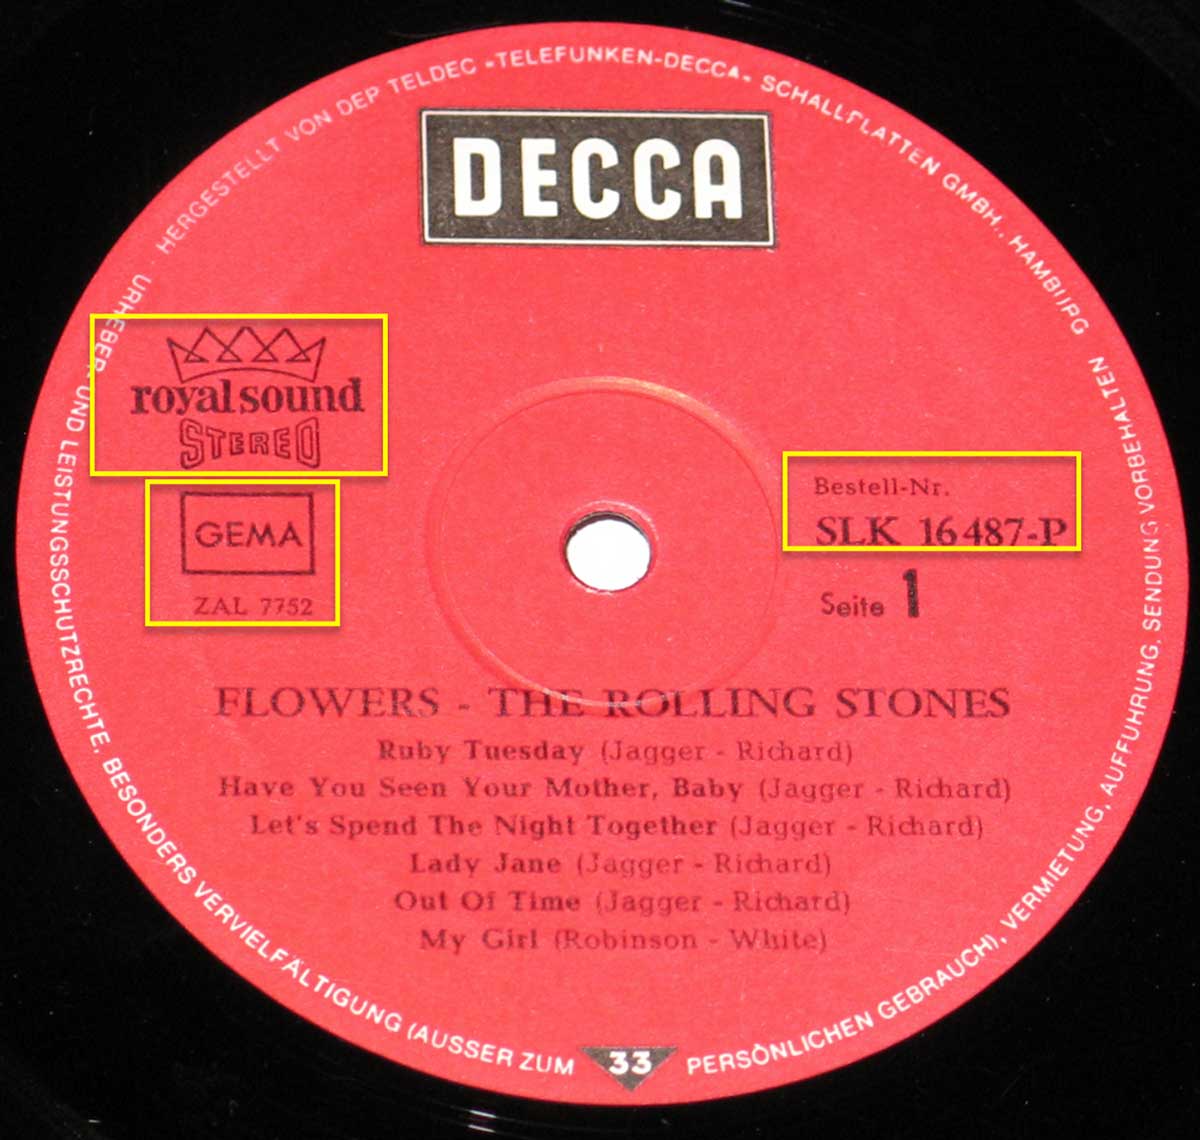 Enlarged High Resolution Photo of the Record's label Rolling Stones - Flowers Royal Sound Release https://vinyl-records.nl